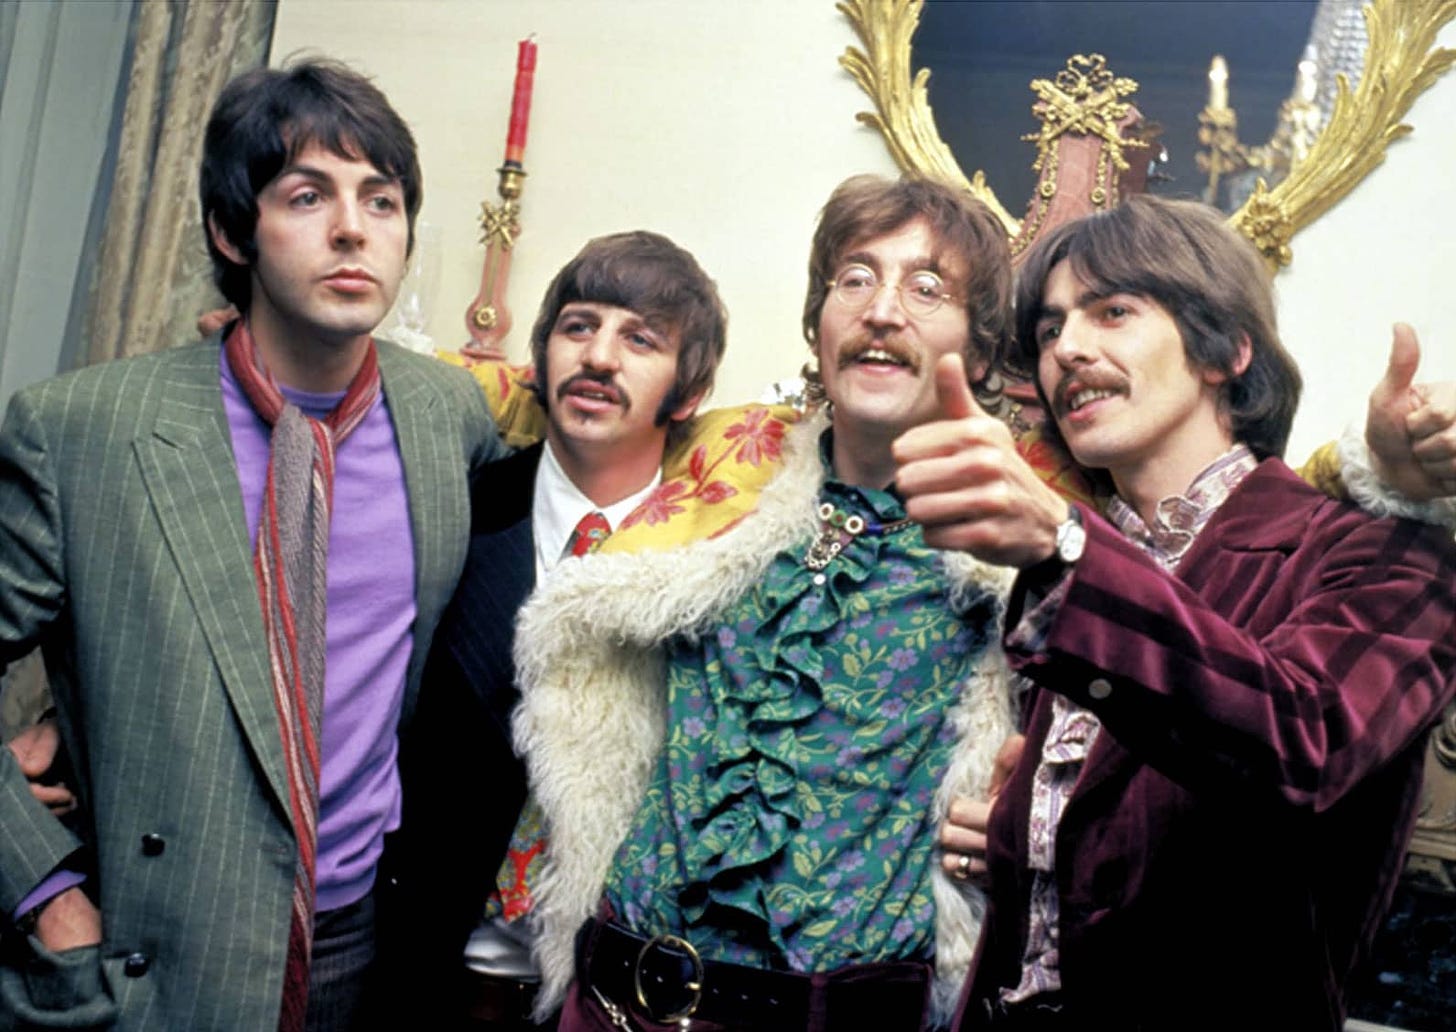 19 May 1967: Press launch for Sgt Pepper